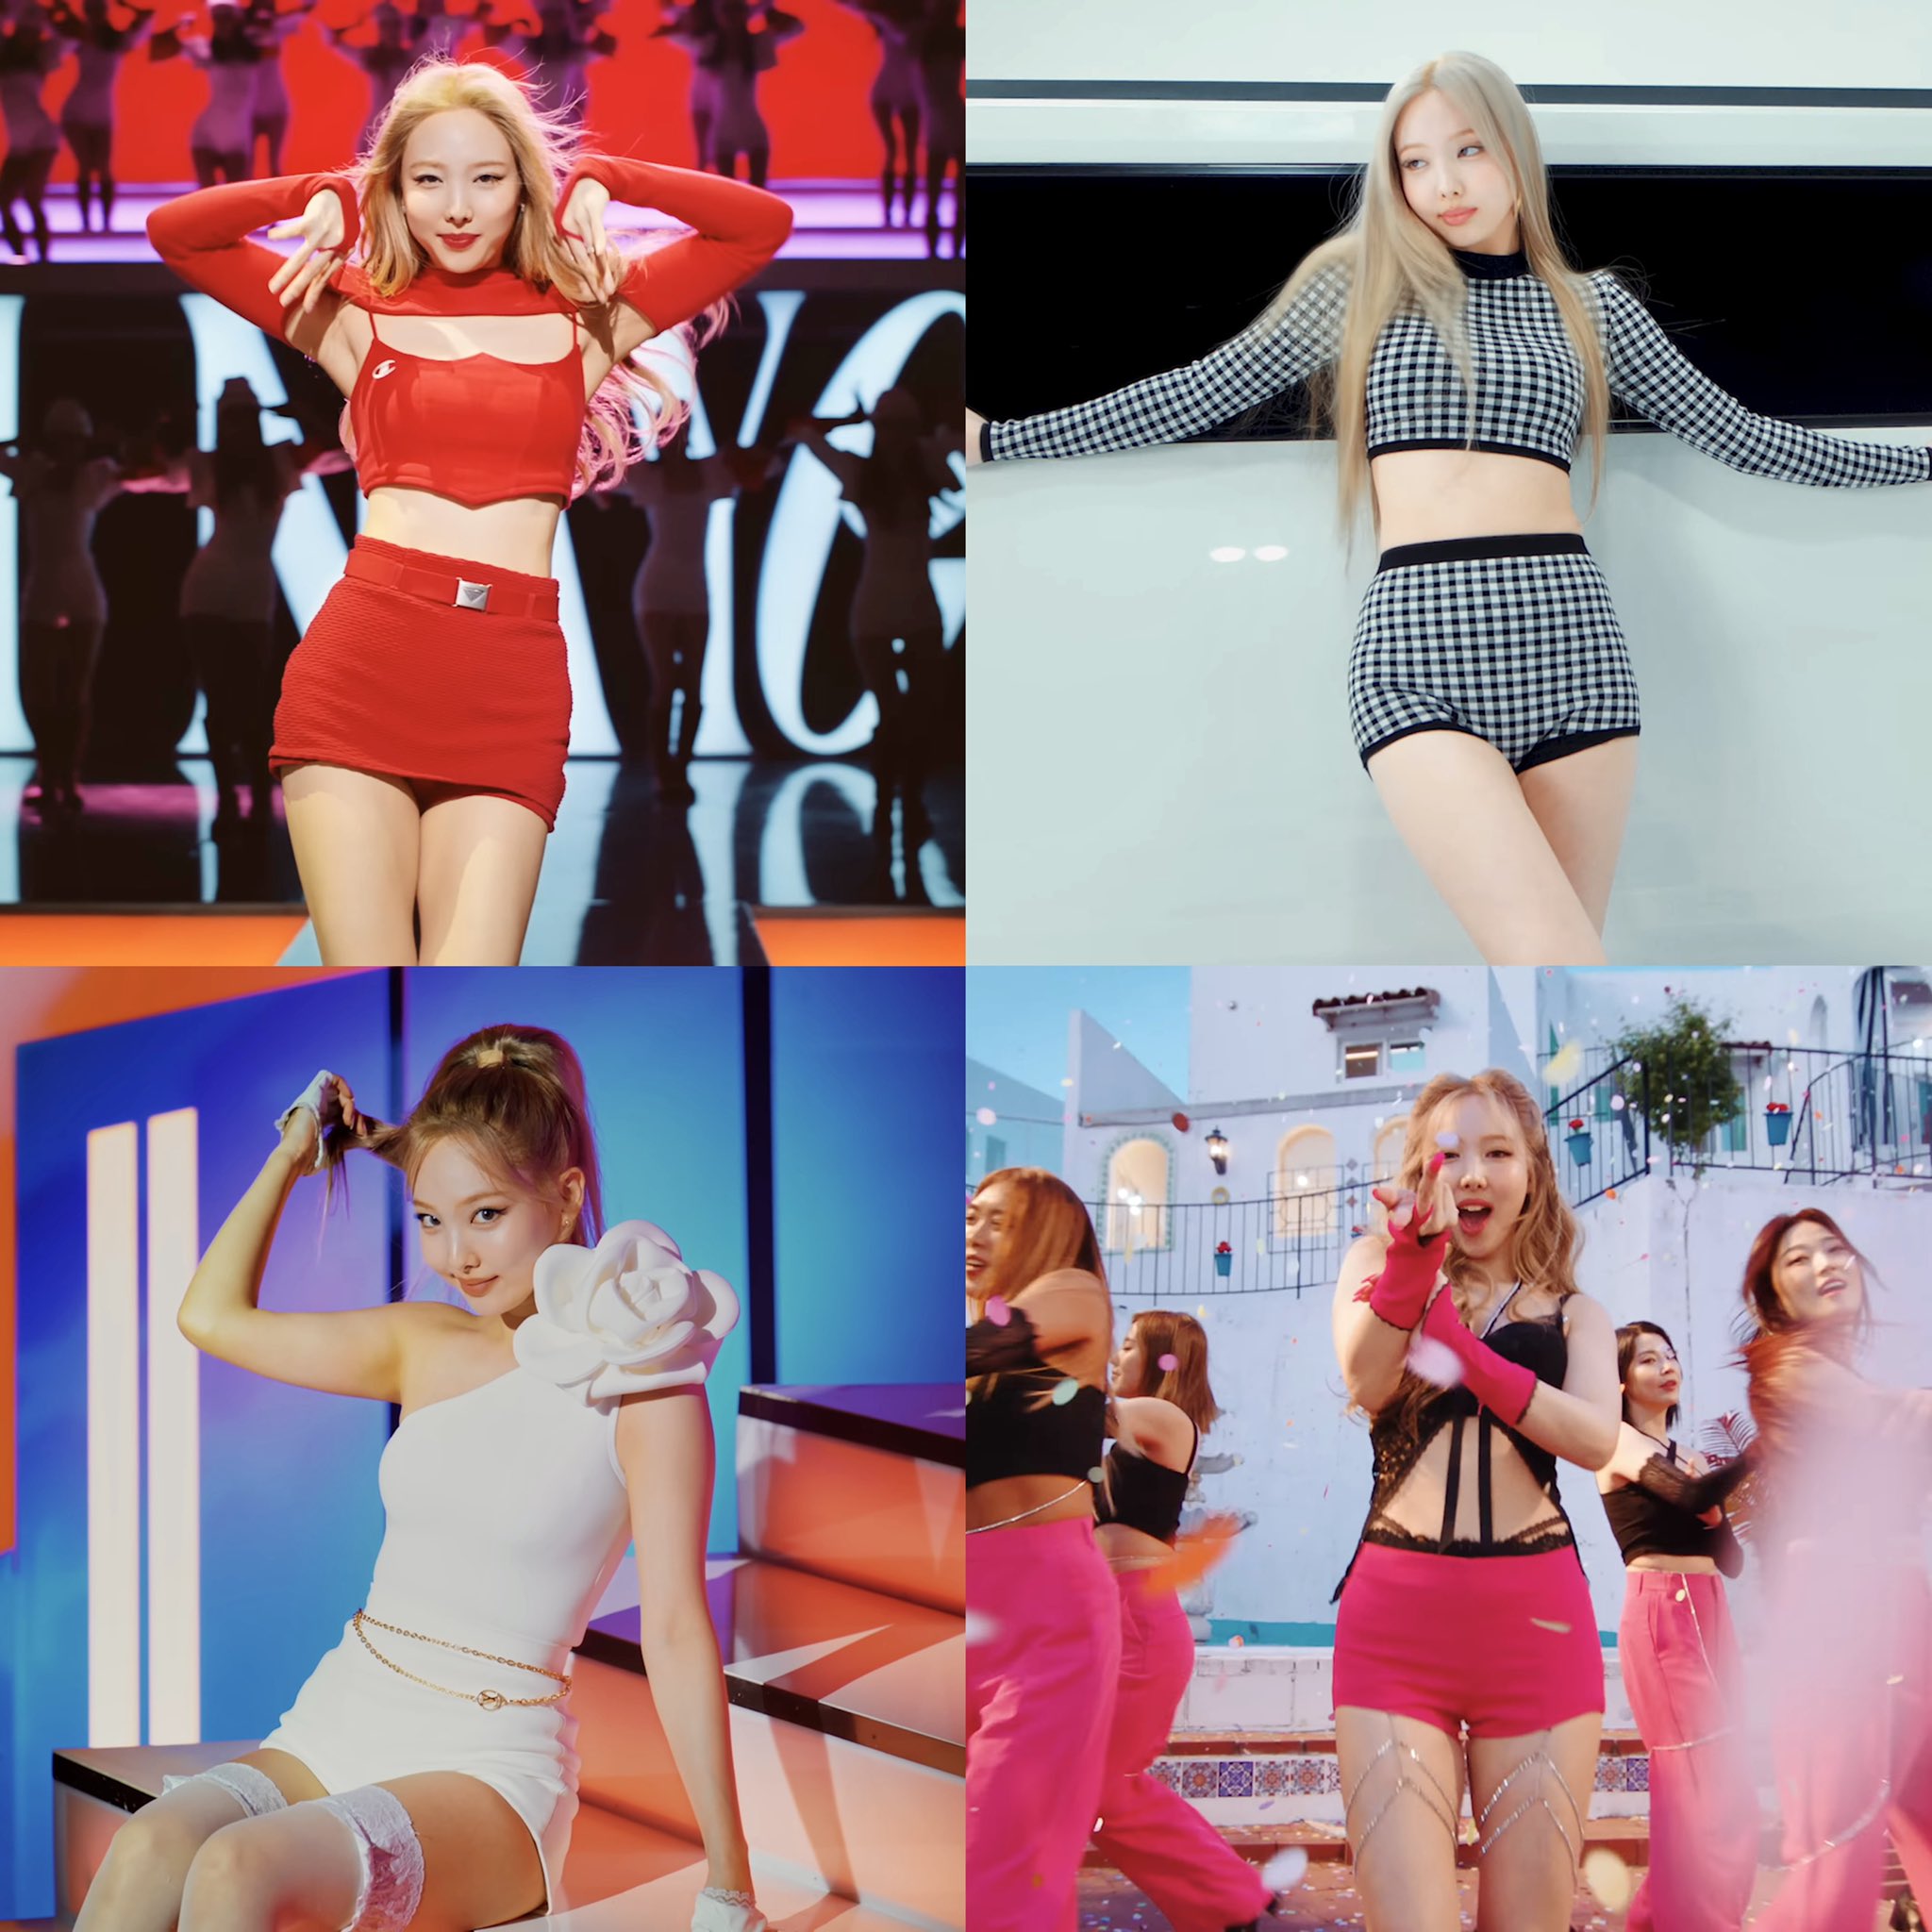 nayeon pop outfits